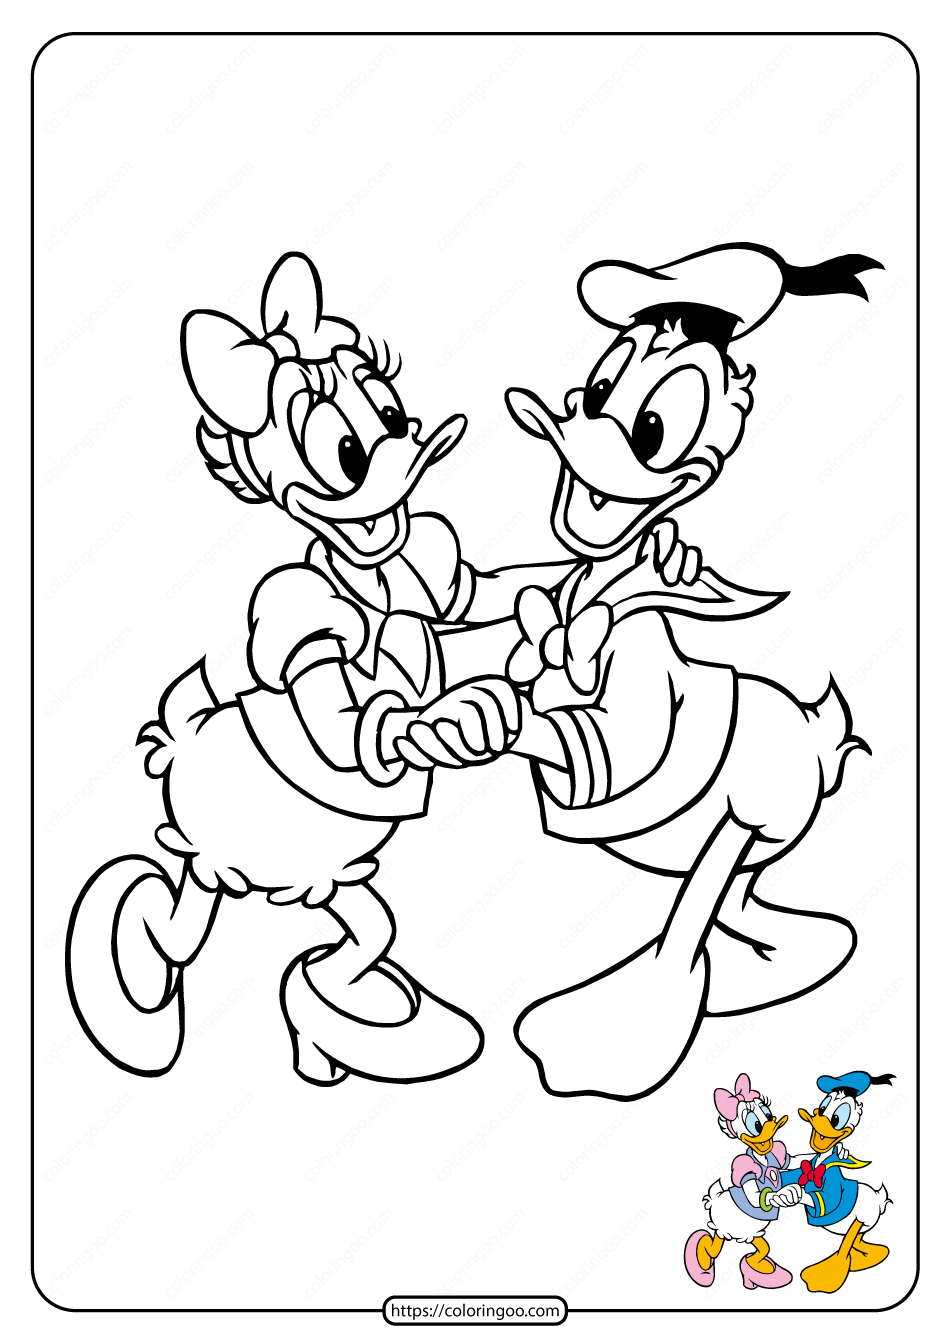 printable daisy duck pdf coloring page 11